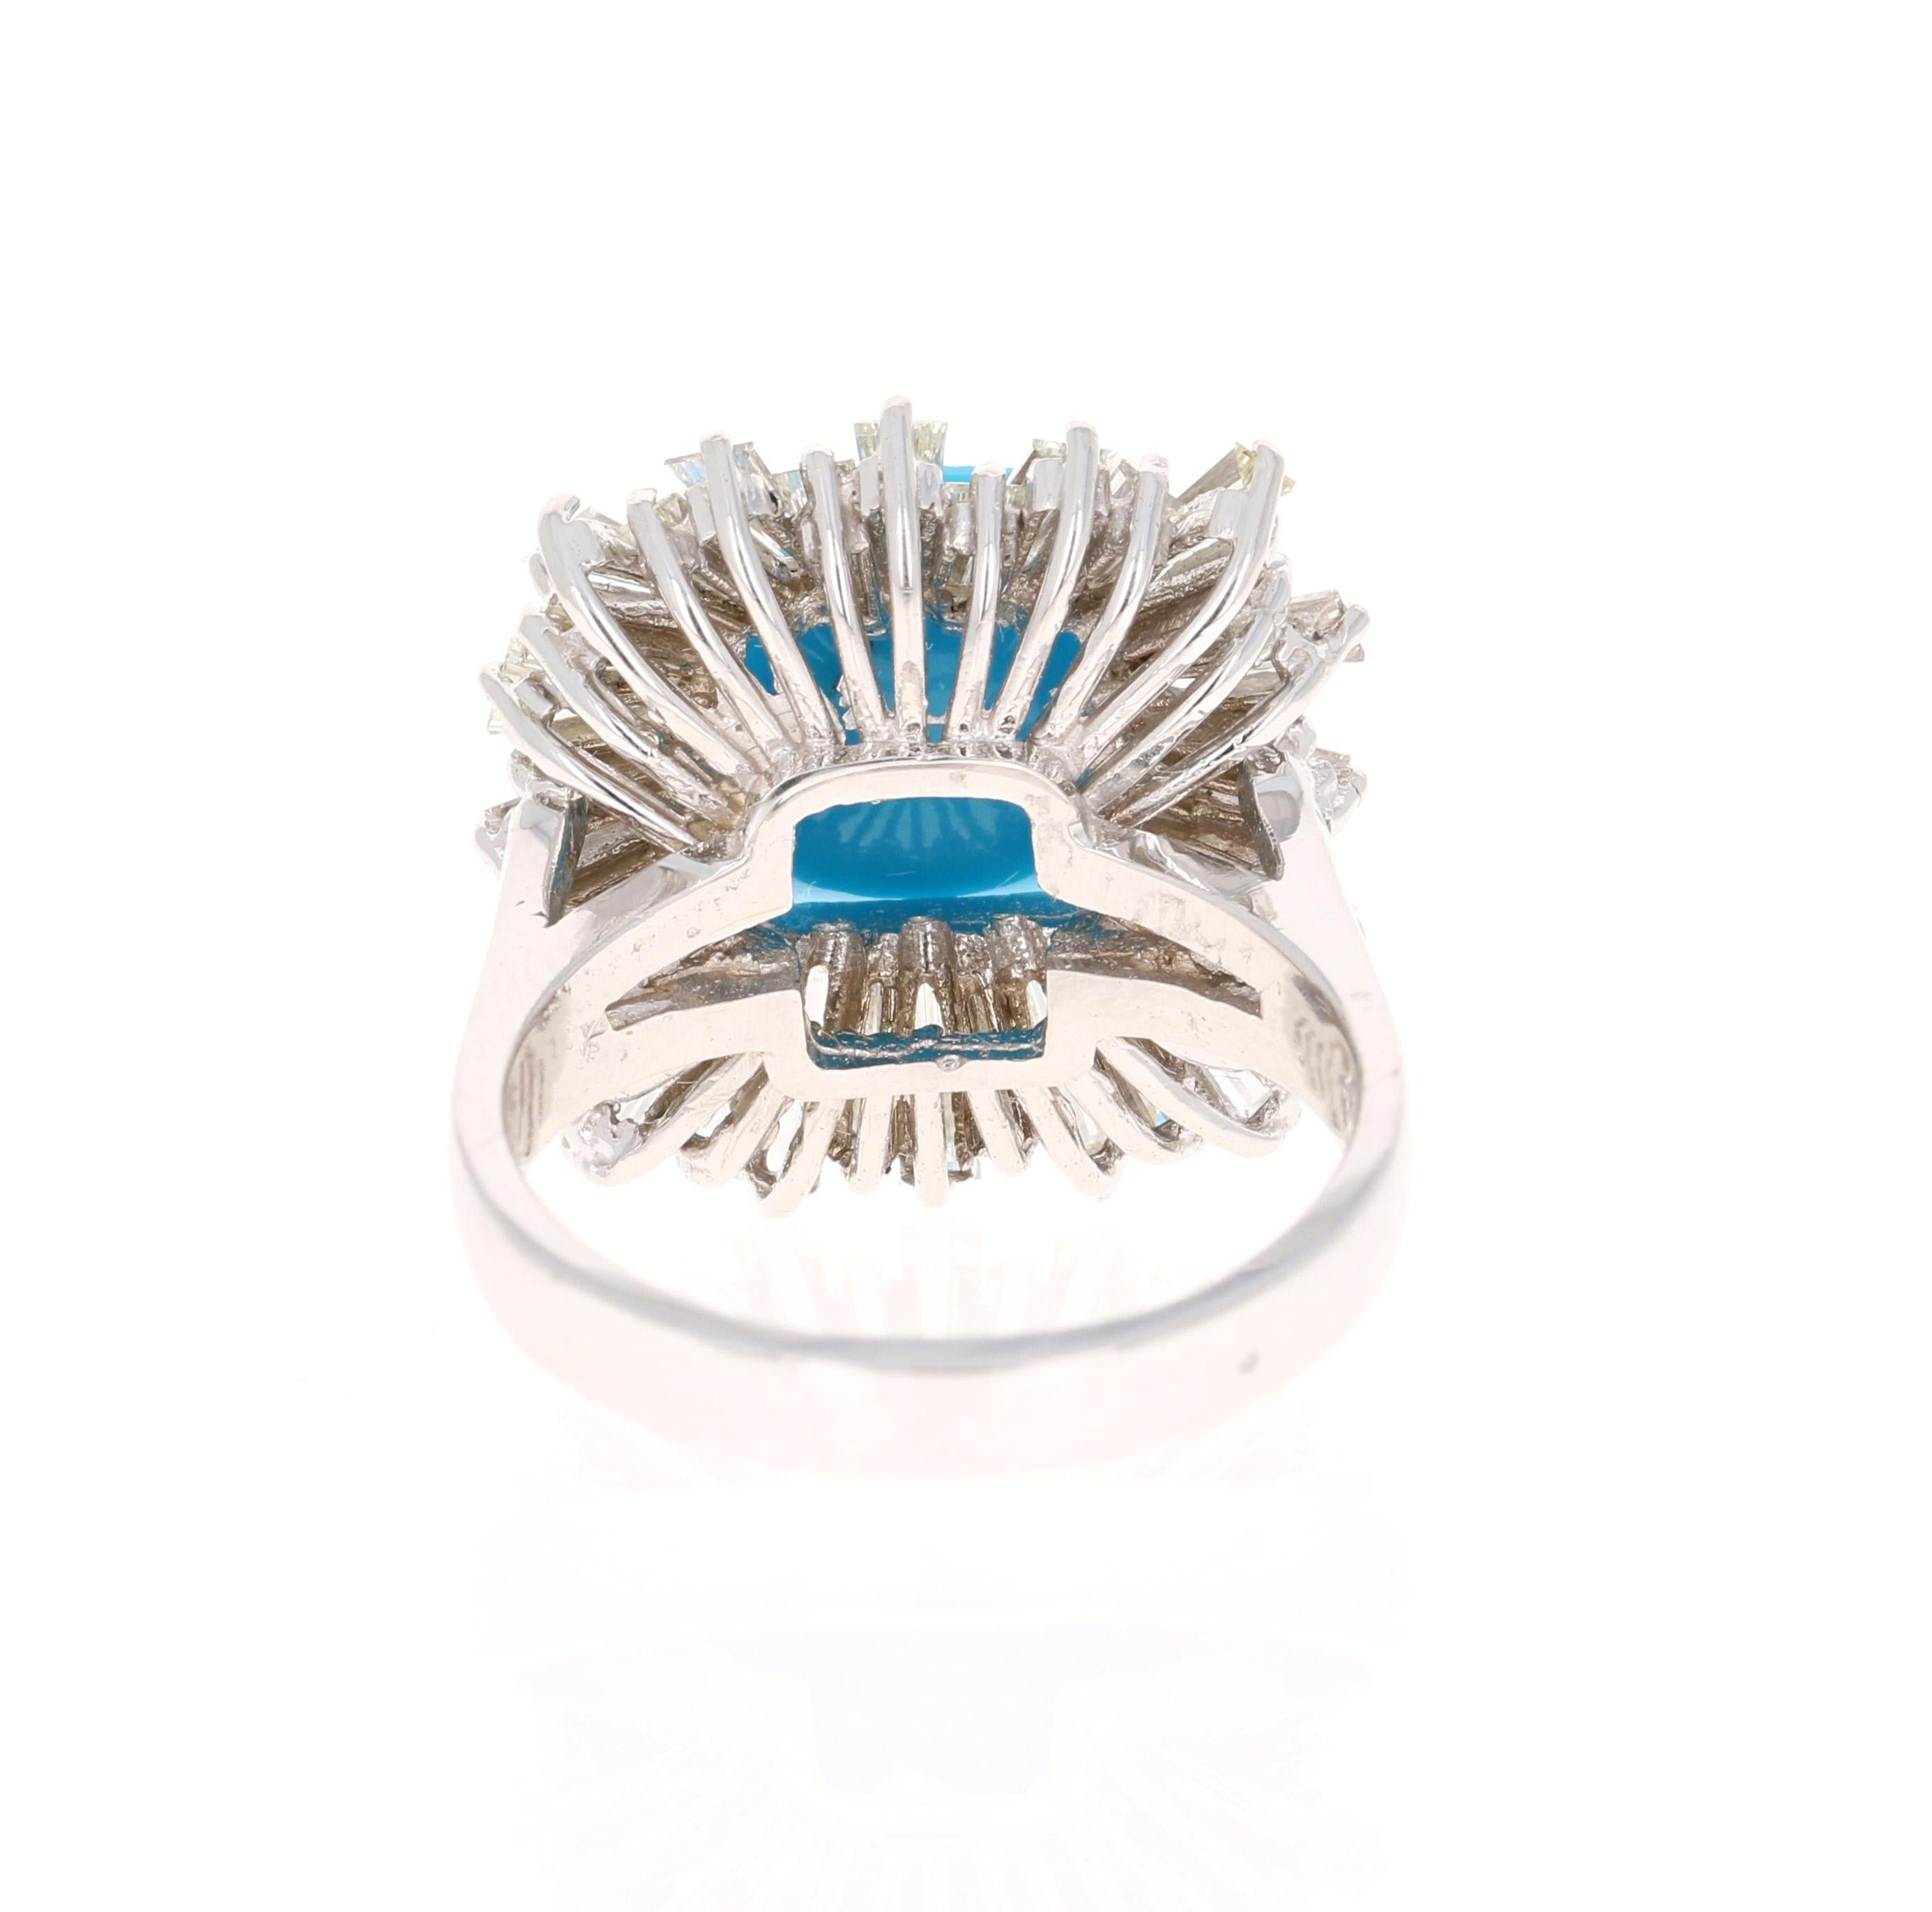 Contemporary 7.26 Carat Turquoise Diamond 14 Karat White Gold Cocktail Ring For Sale